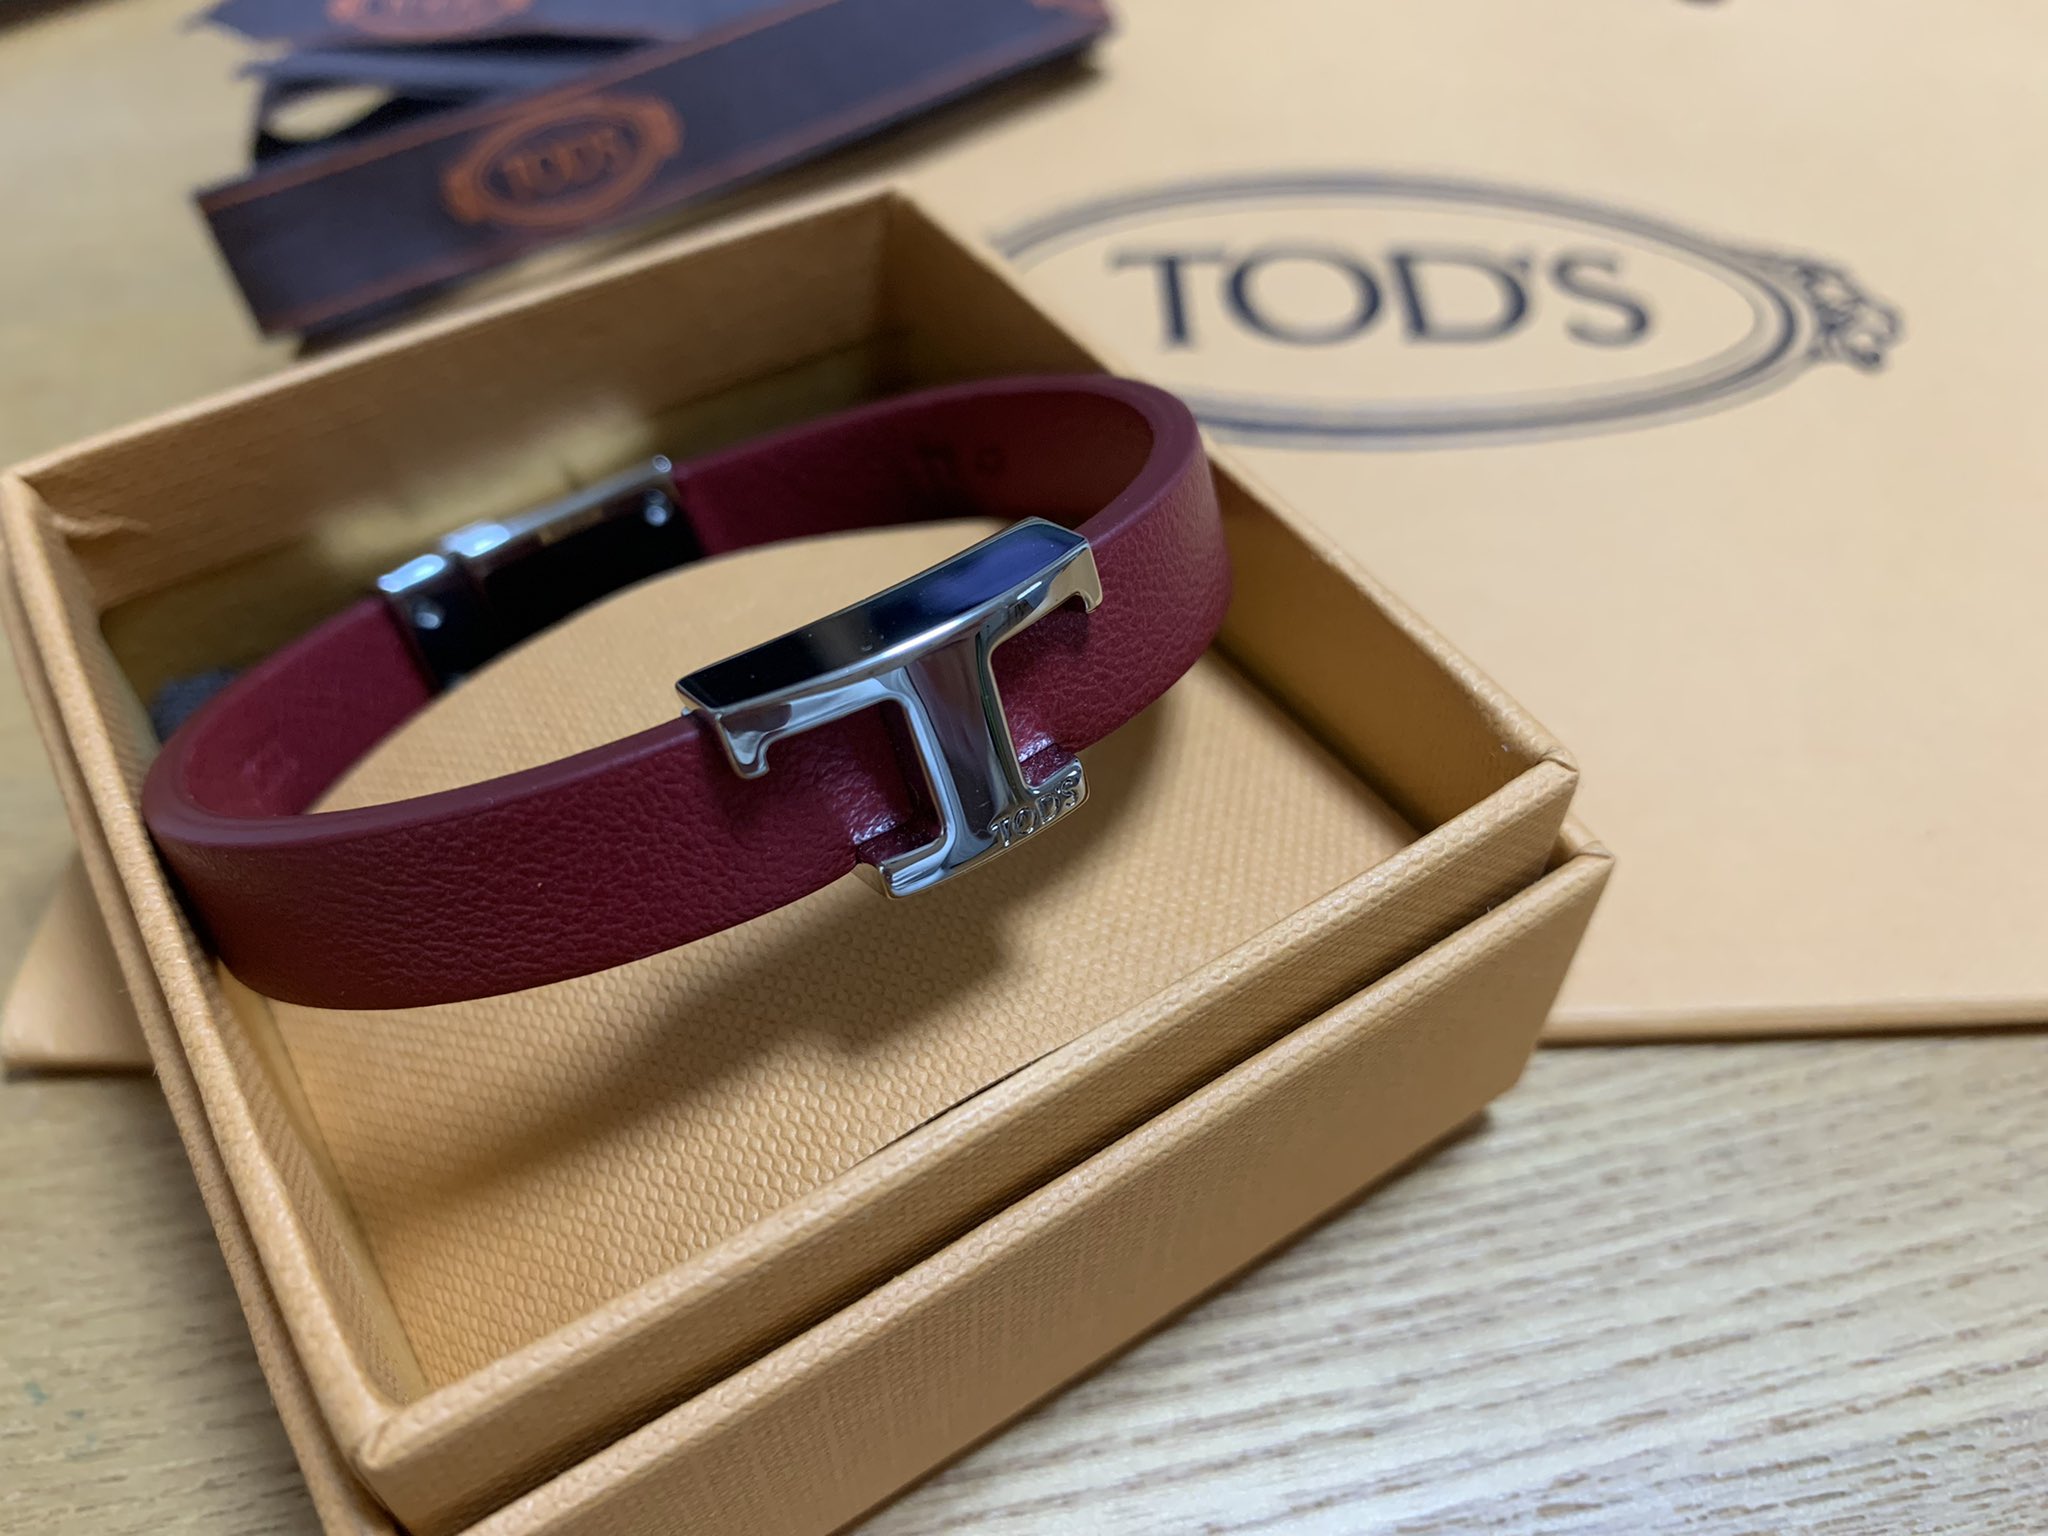 tods - Twitter Search / Twitter